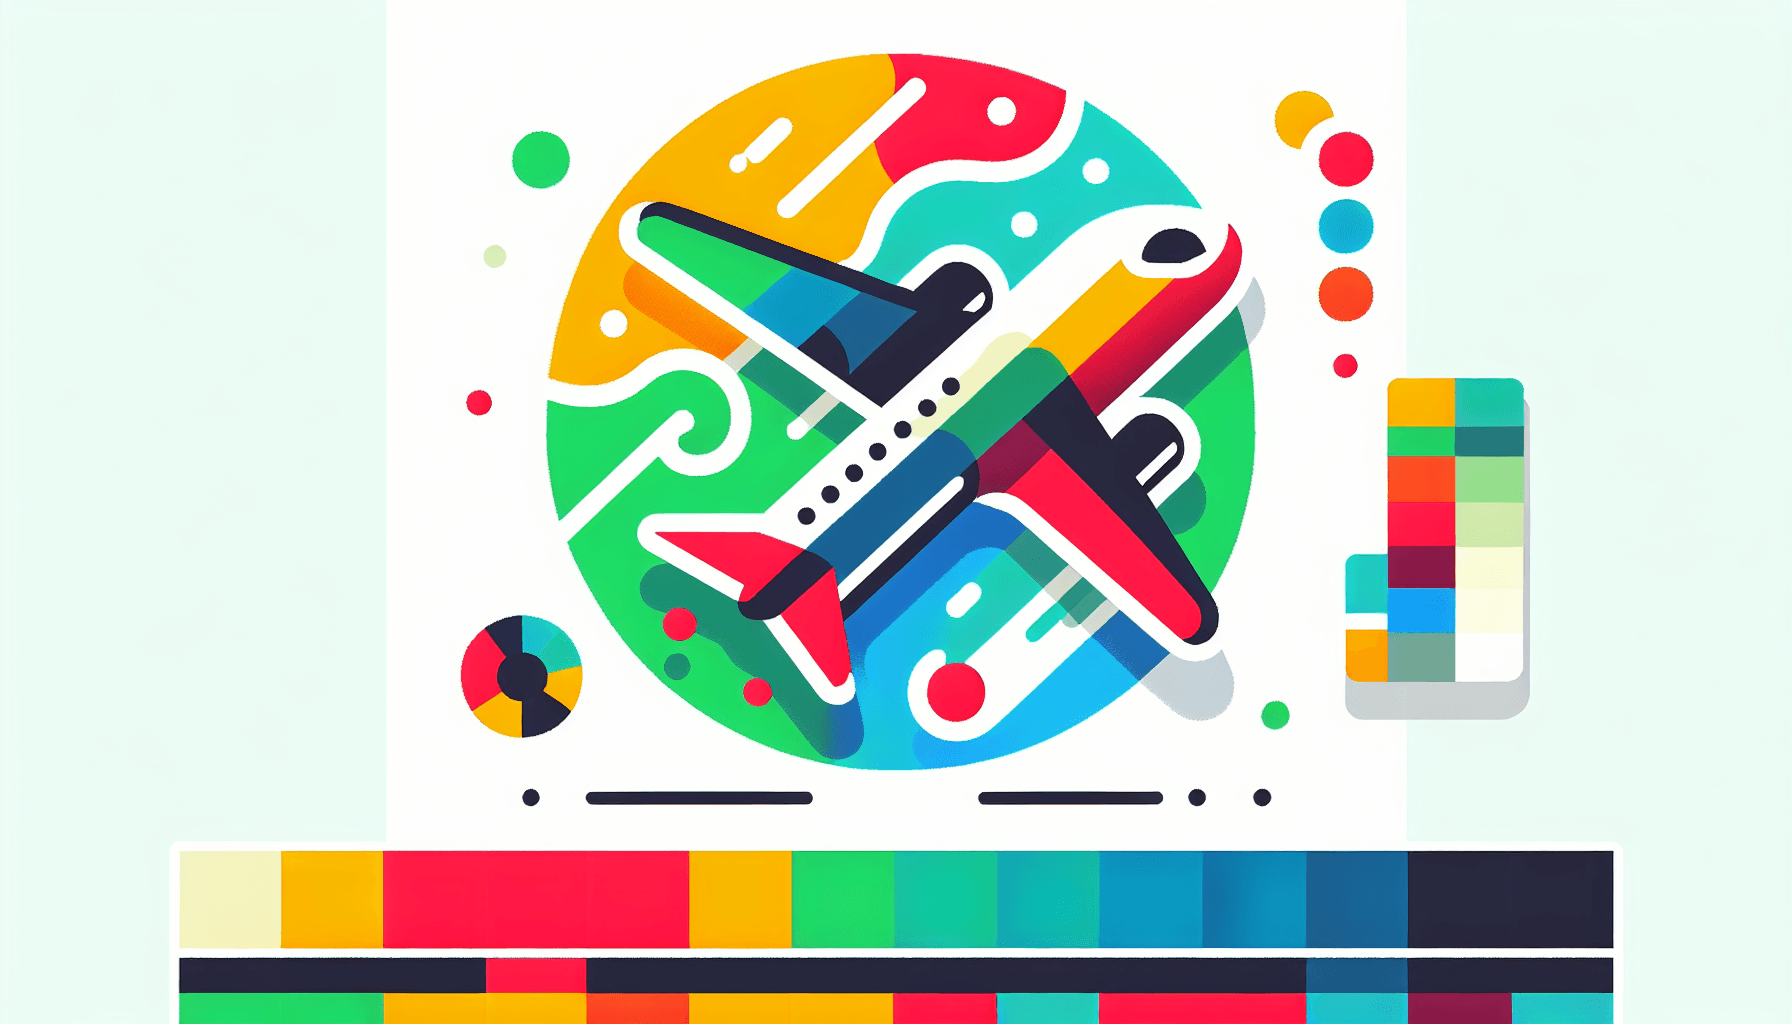 Airplane in flat illustration style and white background, red #f47574, green #88c7a8, yellow #fcc44b, and blue #645bc8 colors.